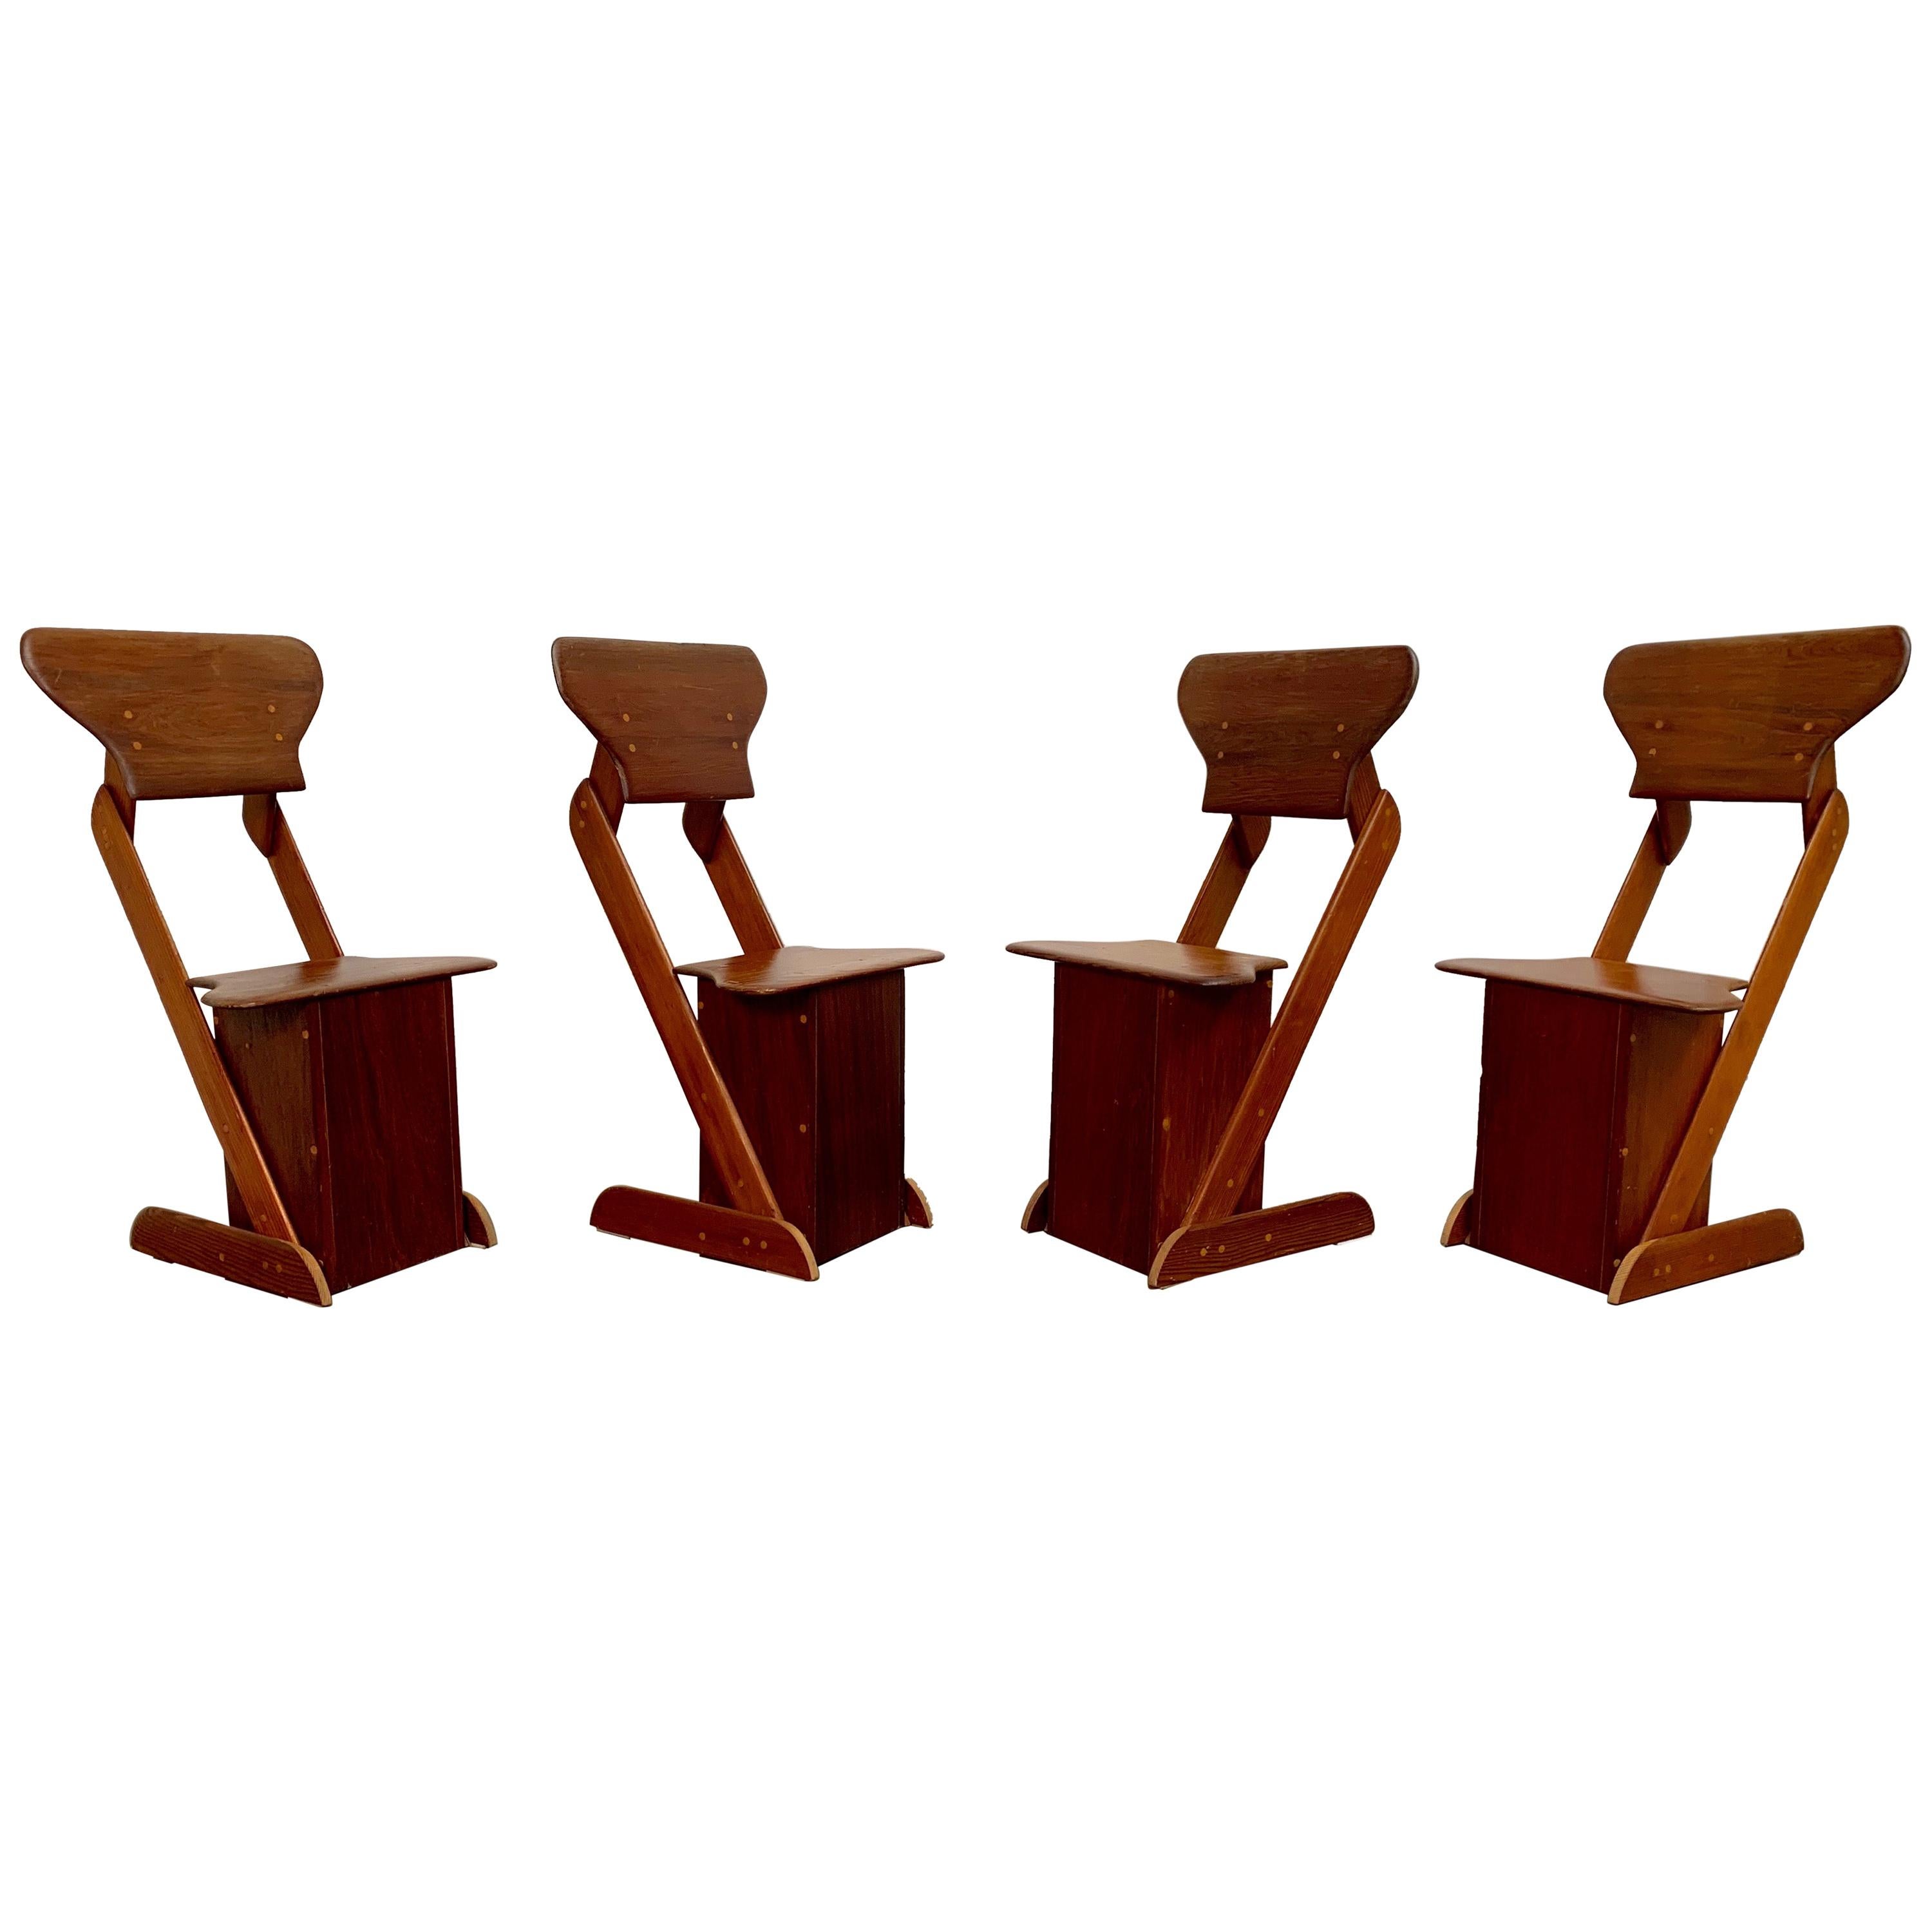 Modernist Rustic Dining Chairs